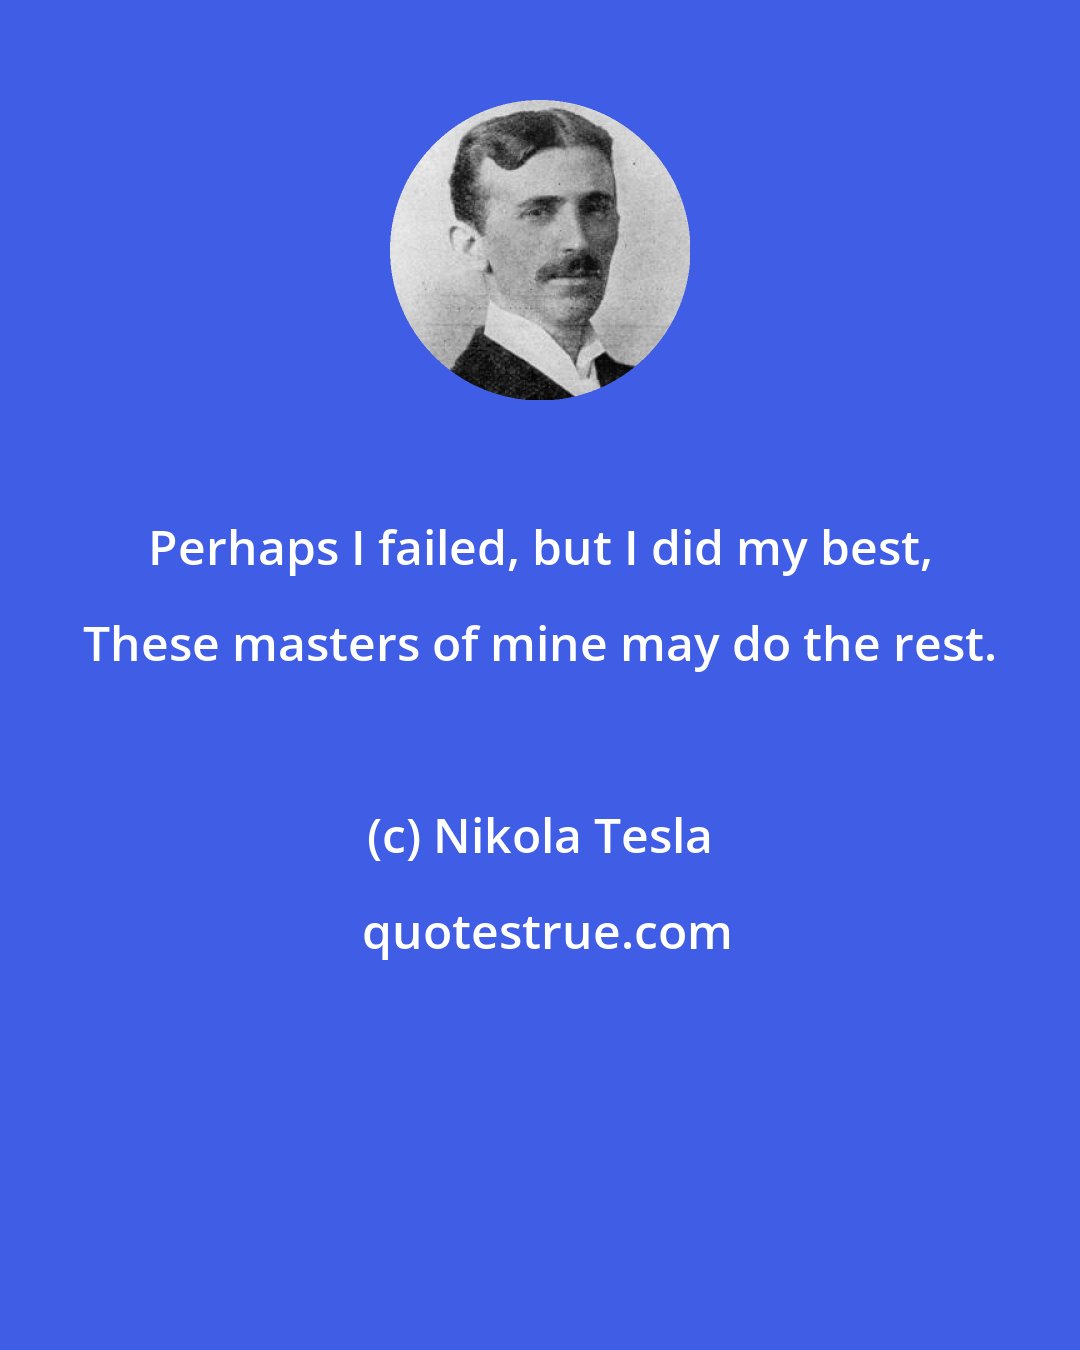 Nikola Tesla: Perhaps I failed, but I did my best, These masters of mine may do the rest.